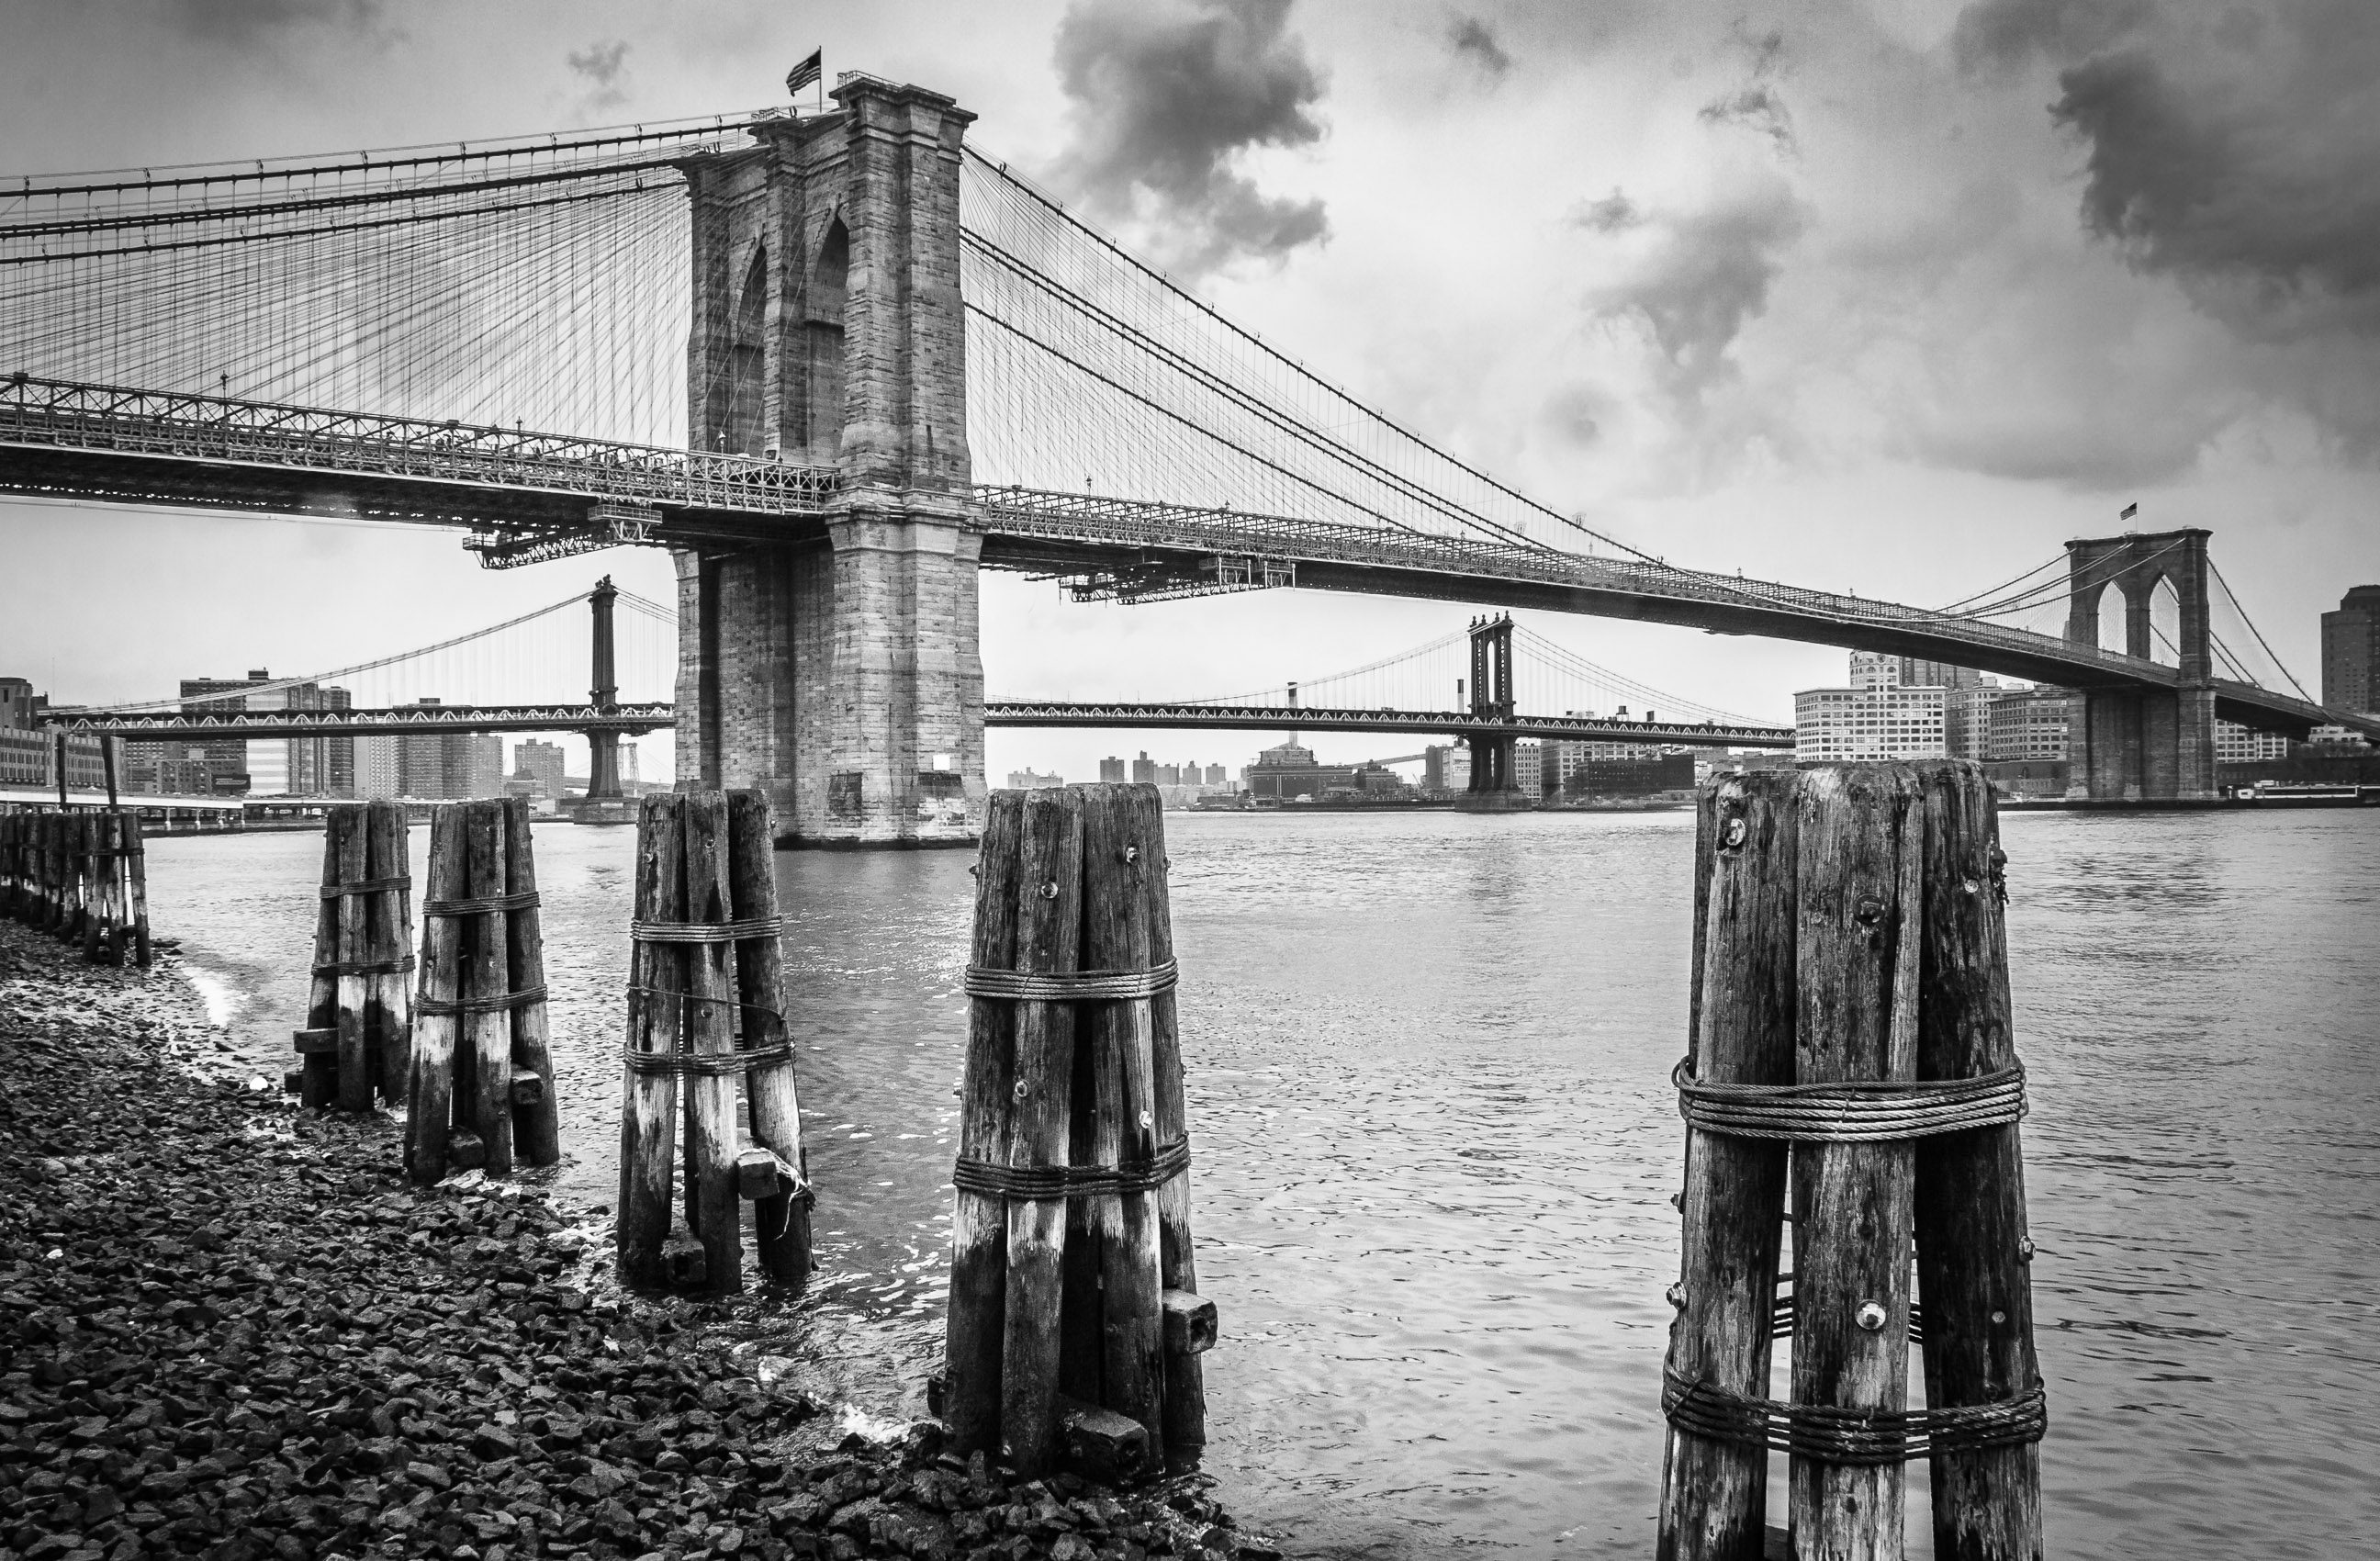 Brooklyn Bridge and wooden piles in the East River, New York City NM005